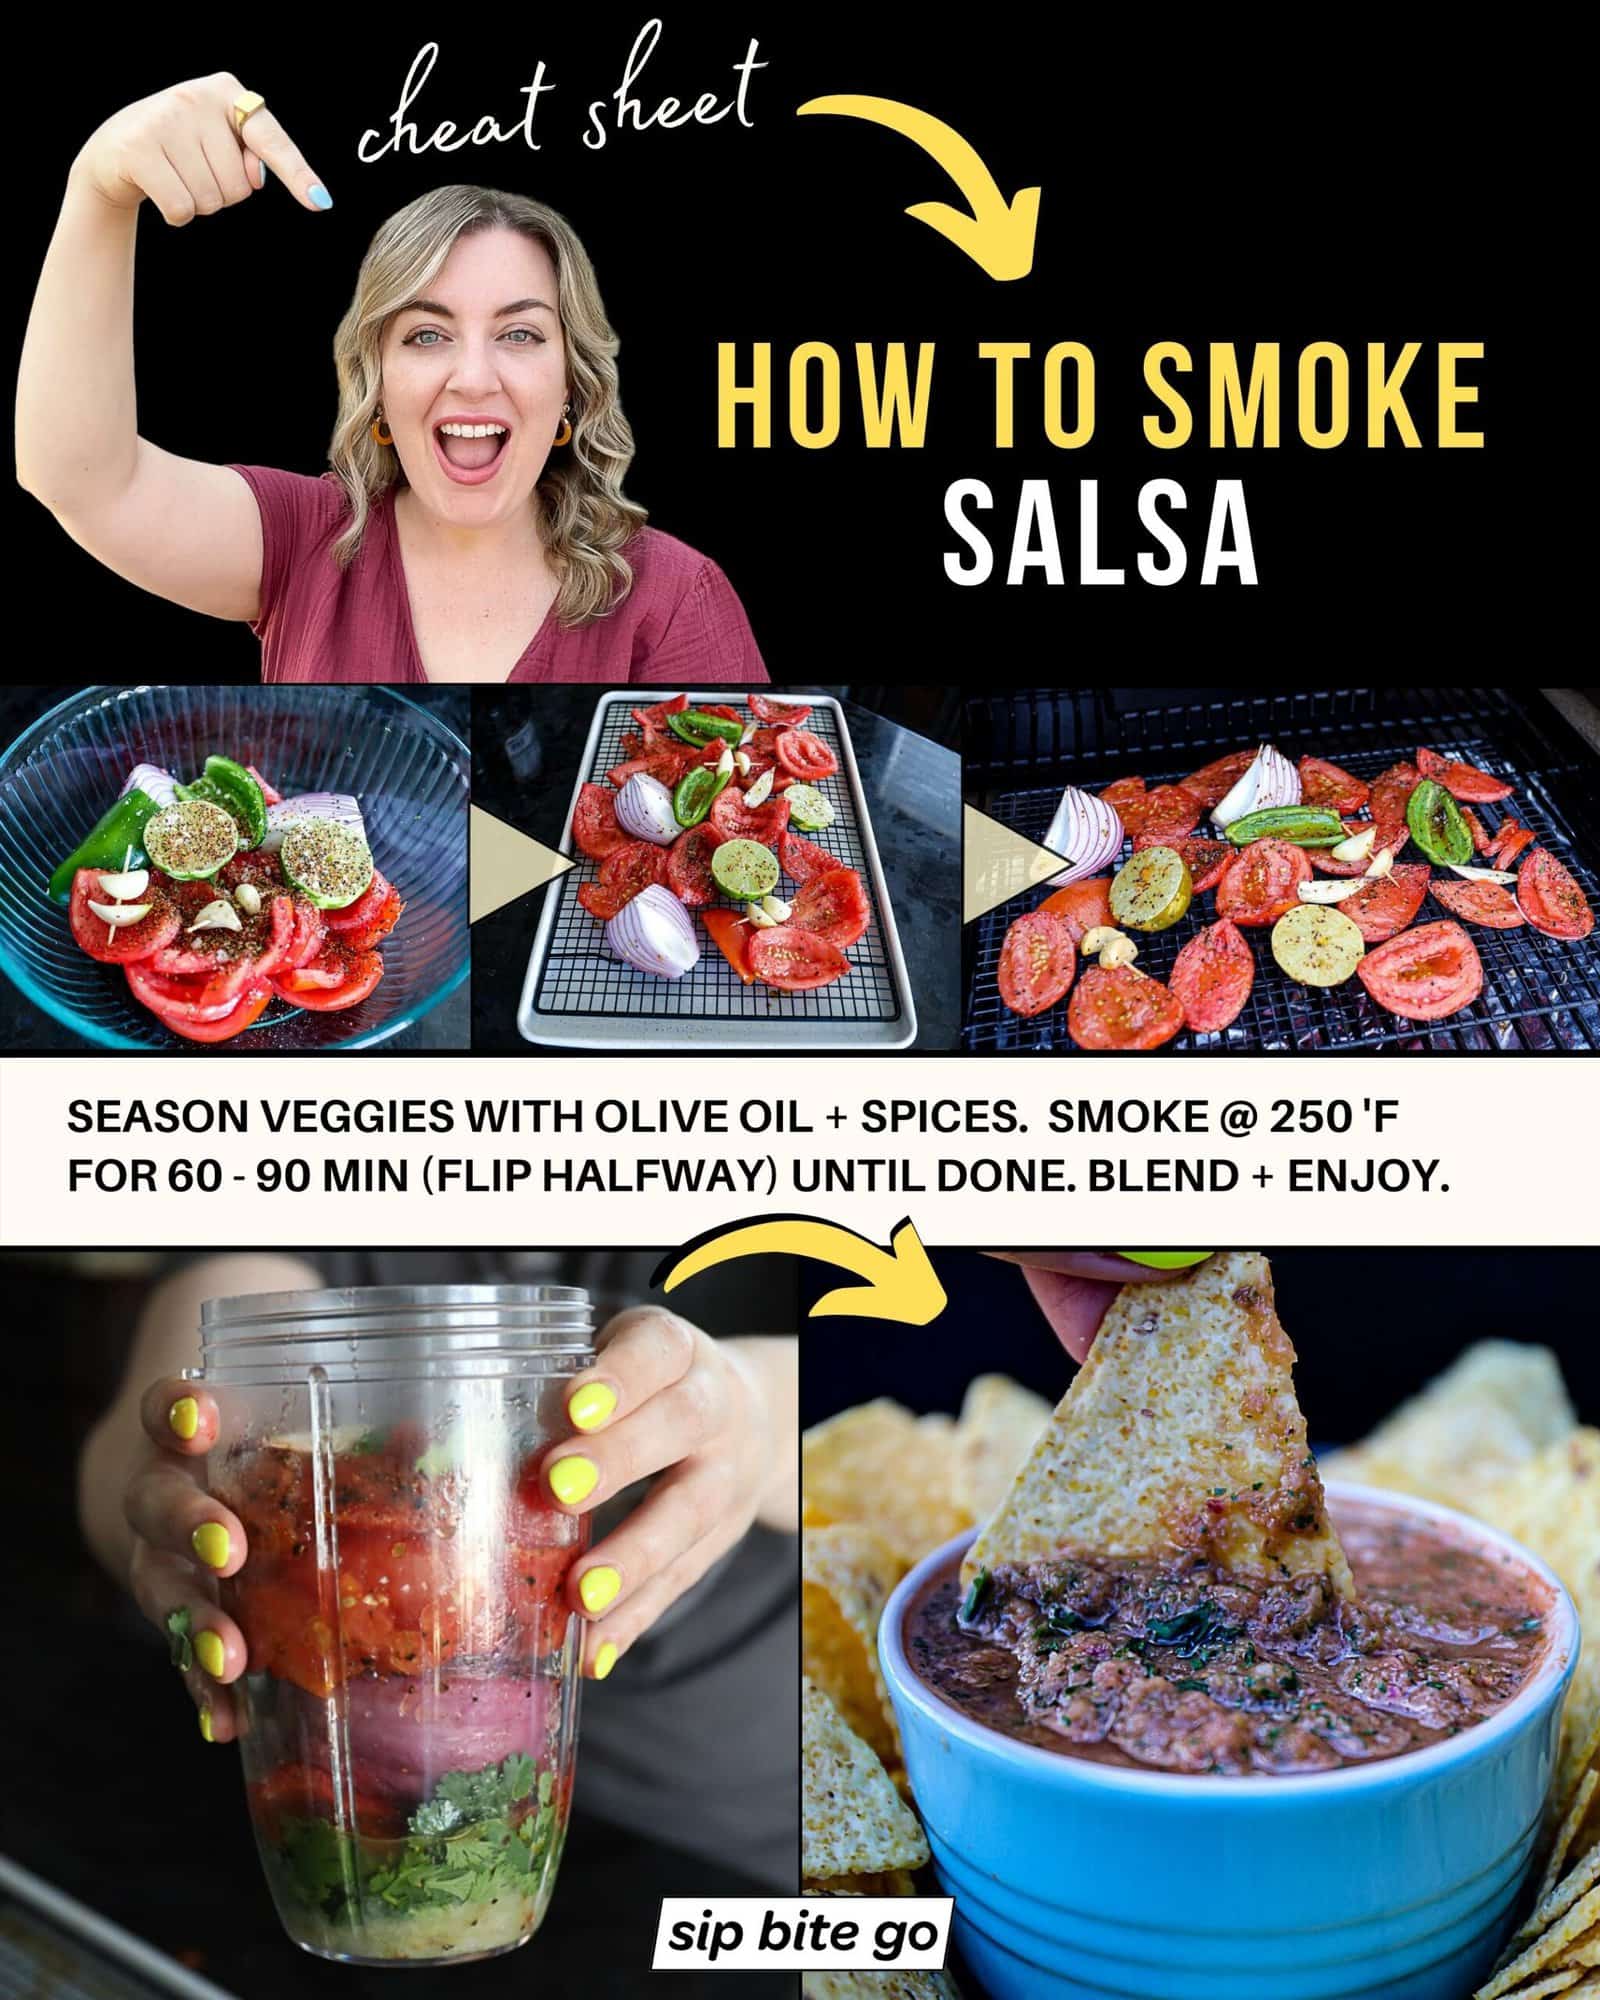 Infographic with recipe steps demonstrating how to smoke salsa on the Traeger Pellet Grills with captions and recipe photos with food blogger Jenna Passaro from Sip Bite Go